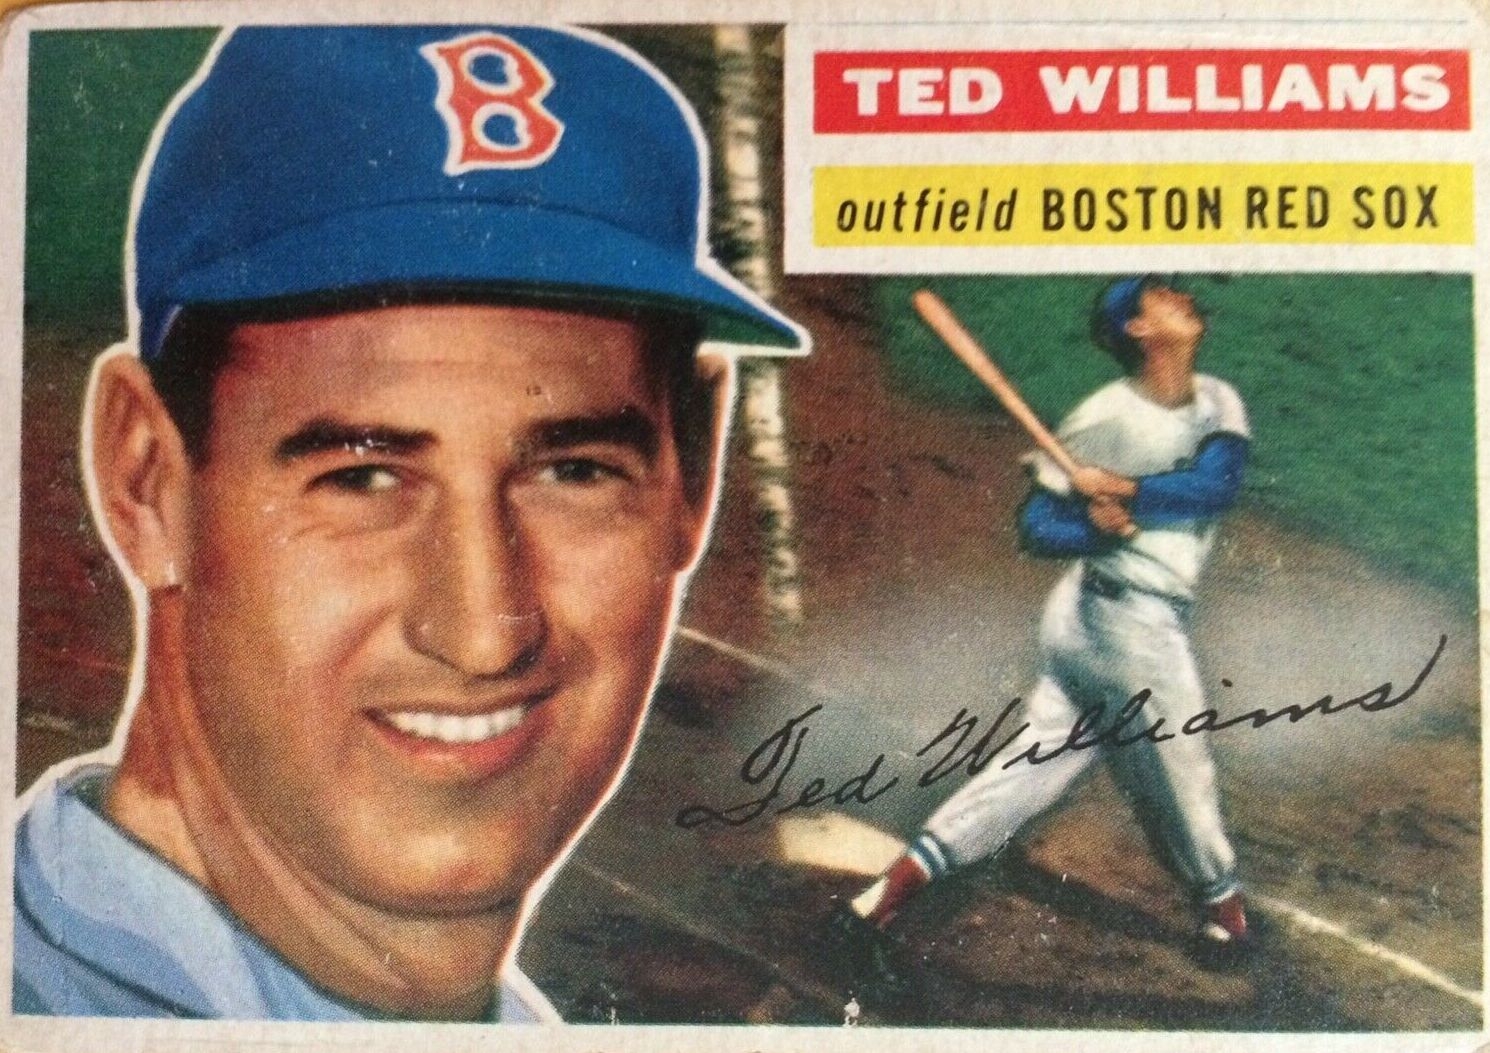 Ted Williams trading card